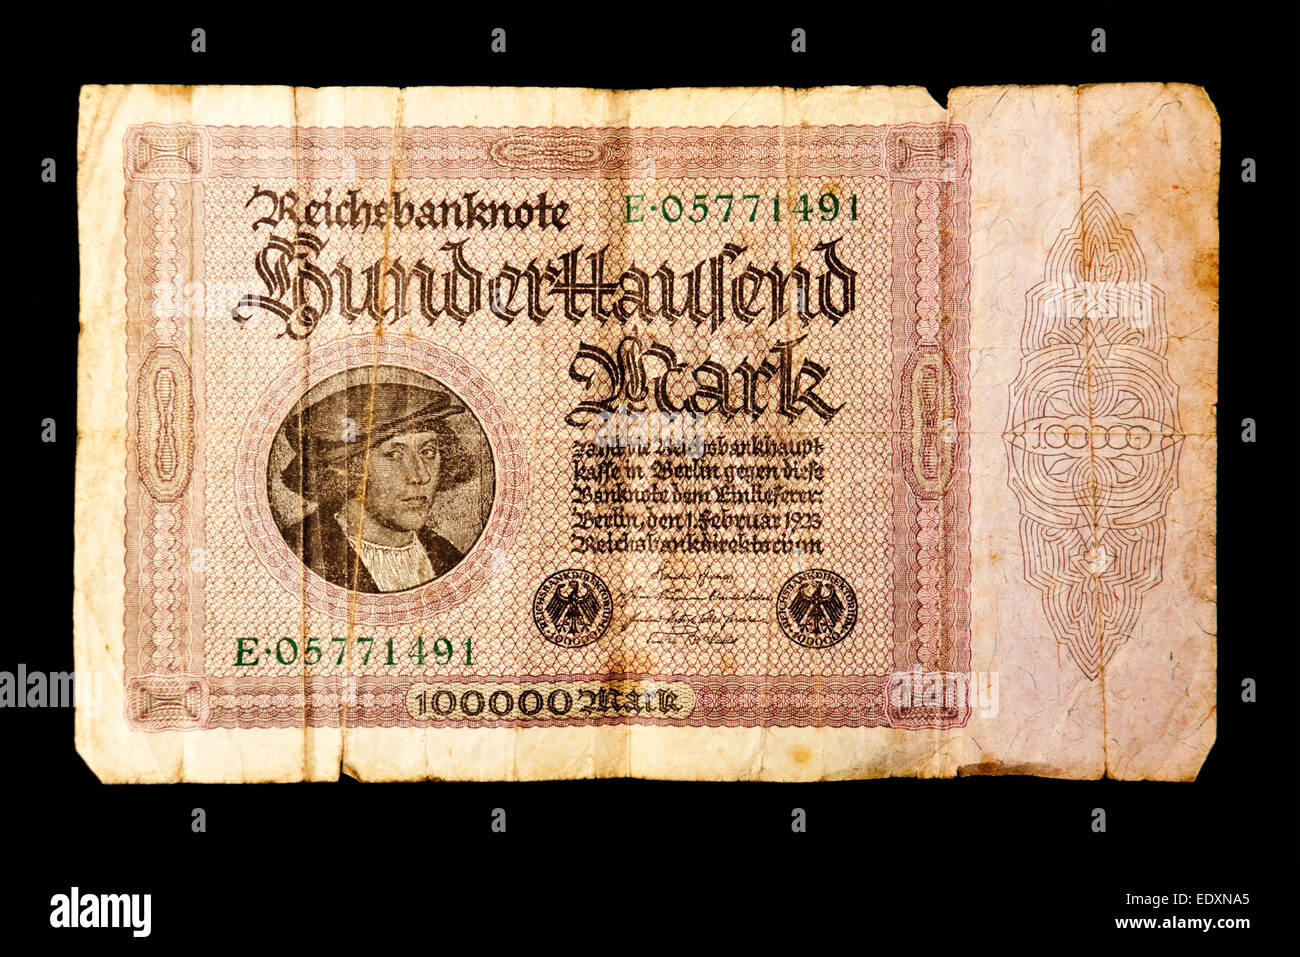 German 100,000 Mark banknote, printed 1st February 1923 during the hyperinflation period of the Weimar Republic Stock Photo